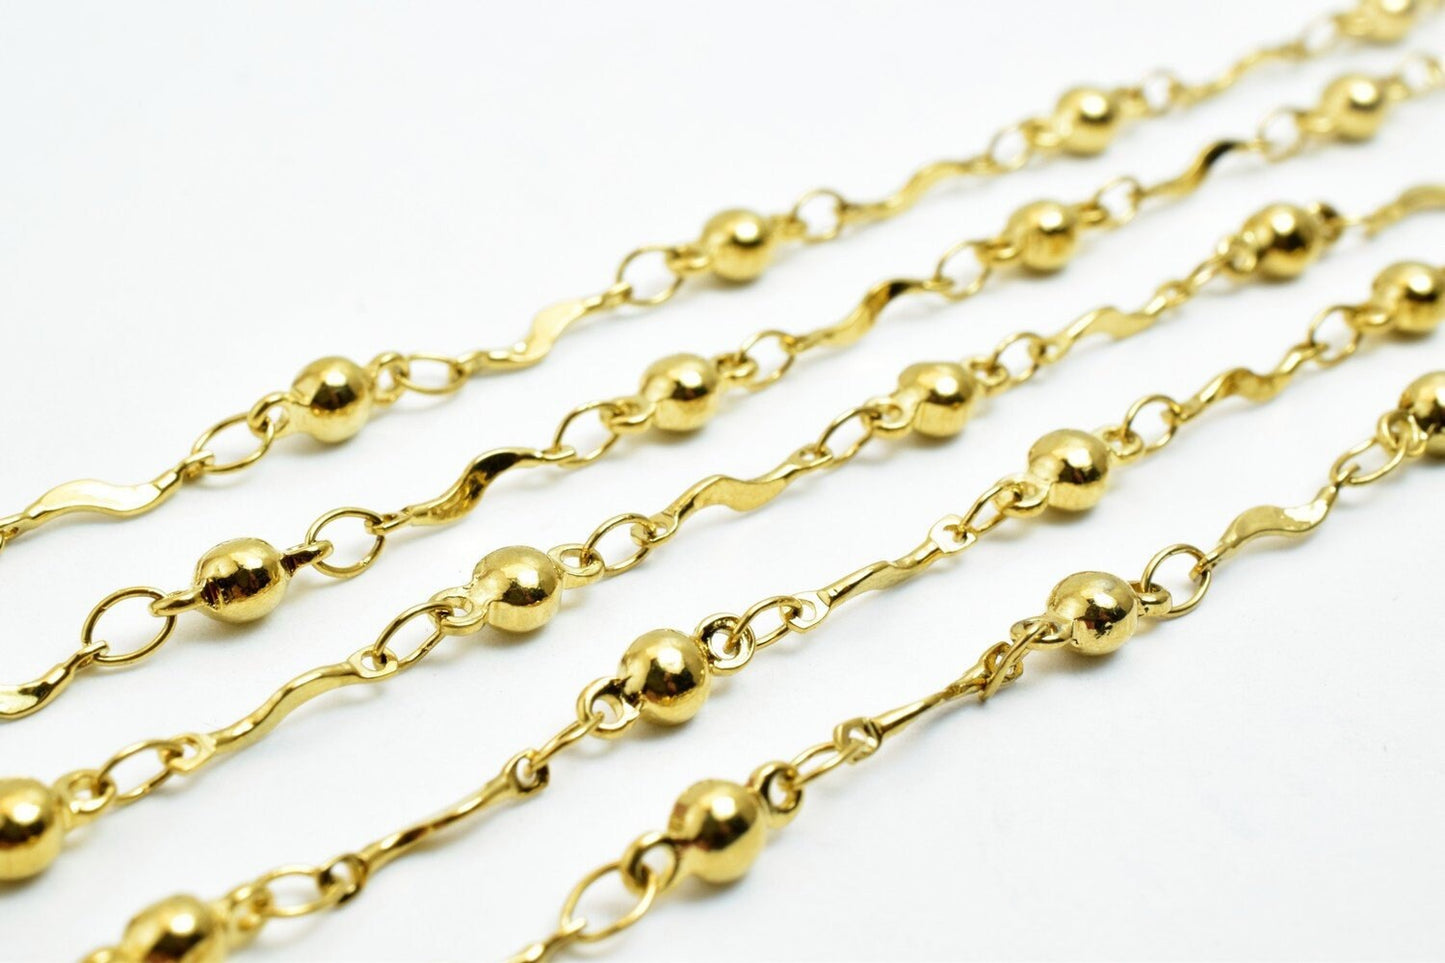 3 Foot 18K Gold Filled Chain, Bar Chain, Satellite Chain, Gold Filled Findings Chain For Jewelry Making GFC070